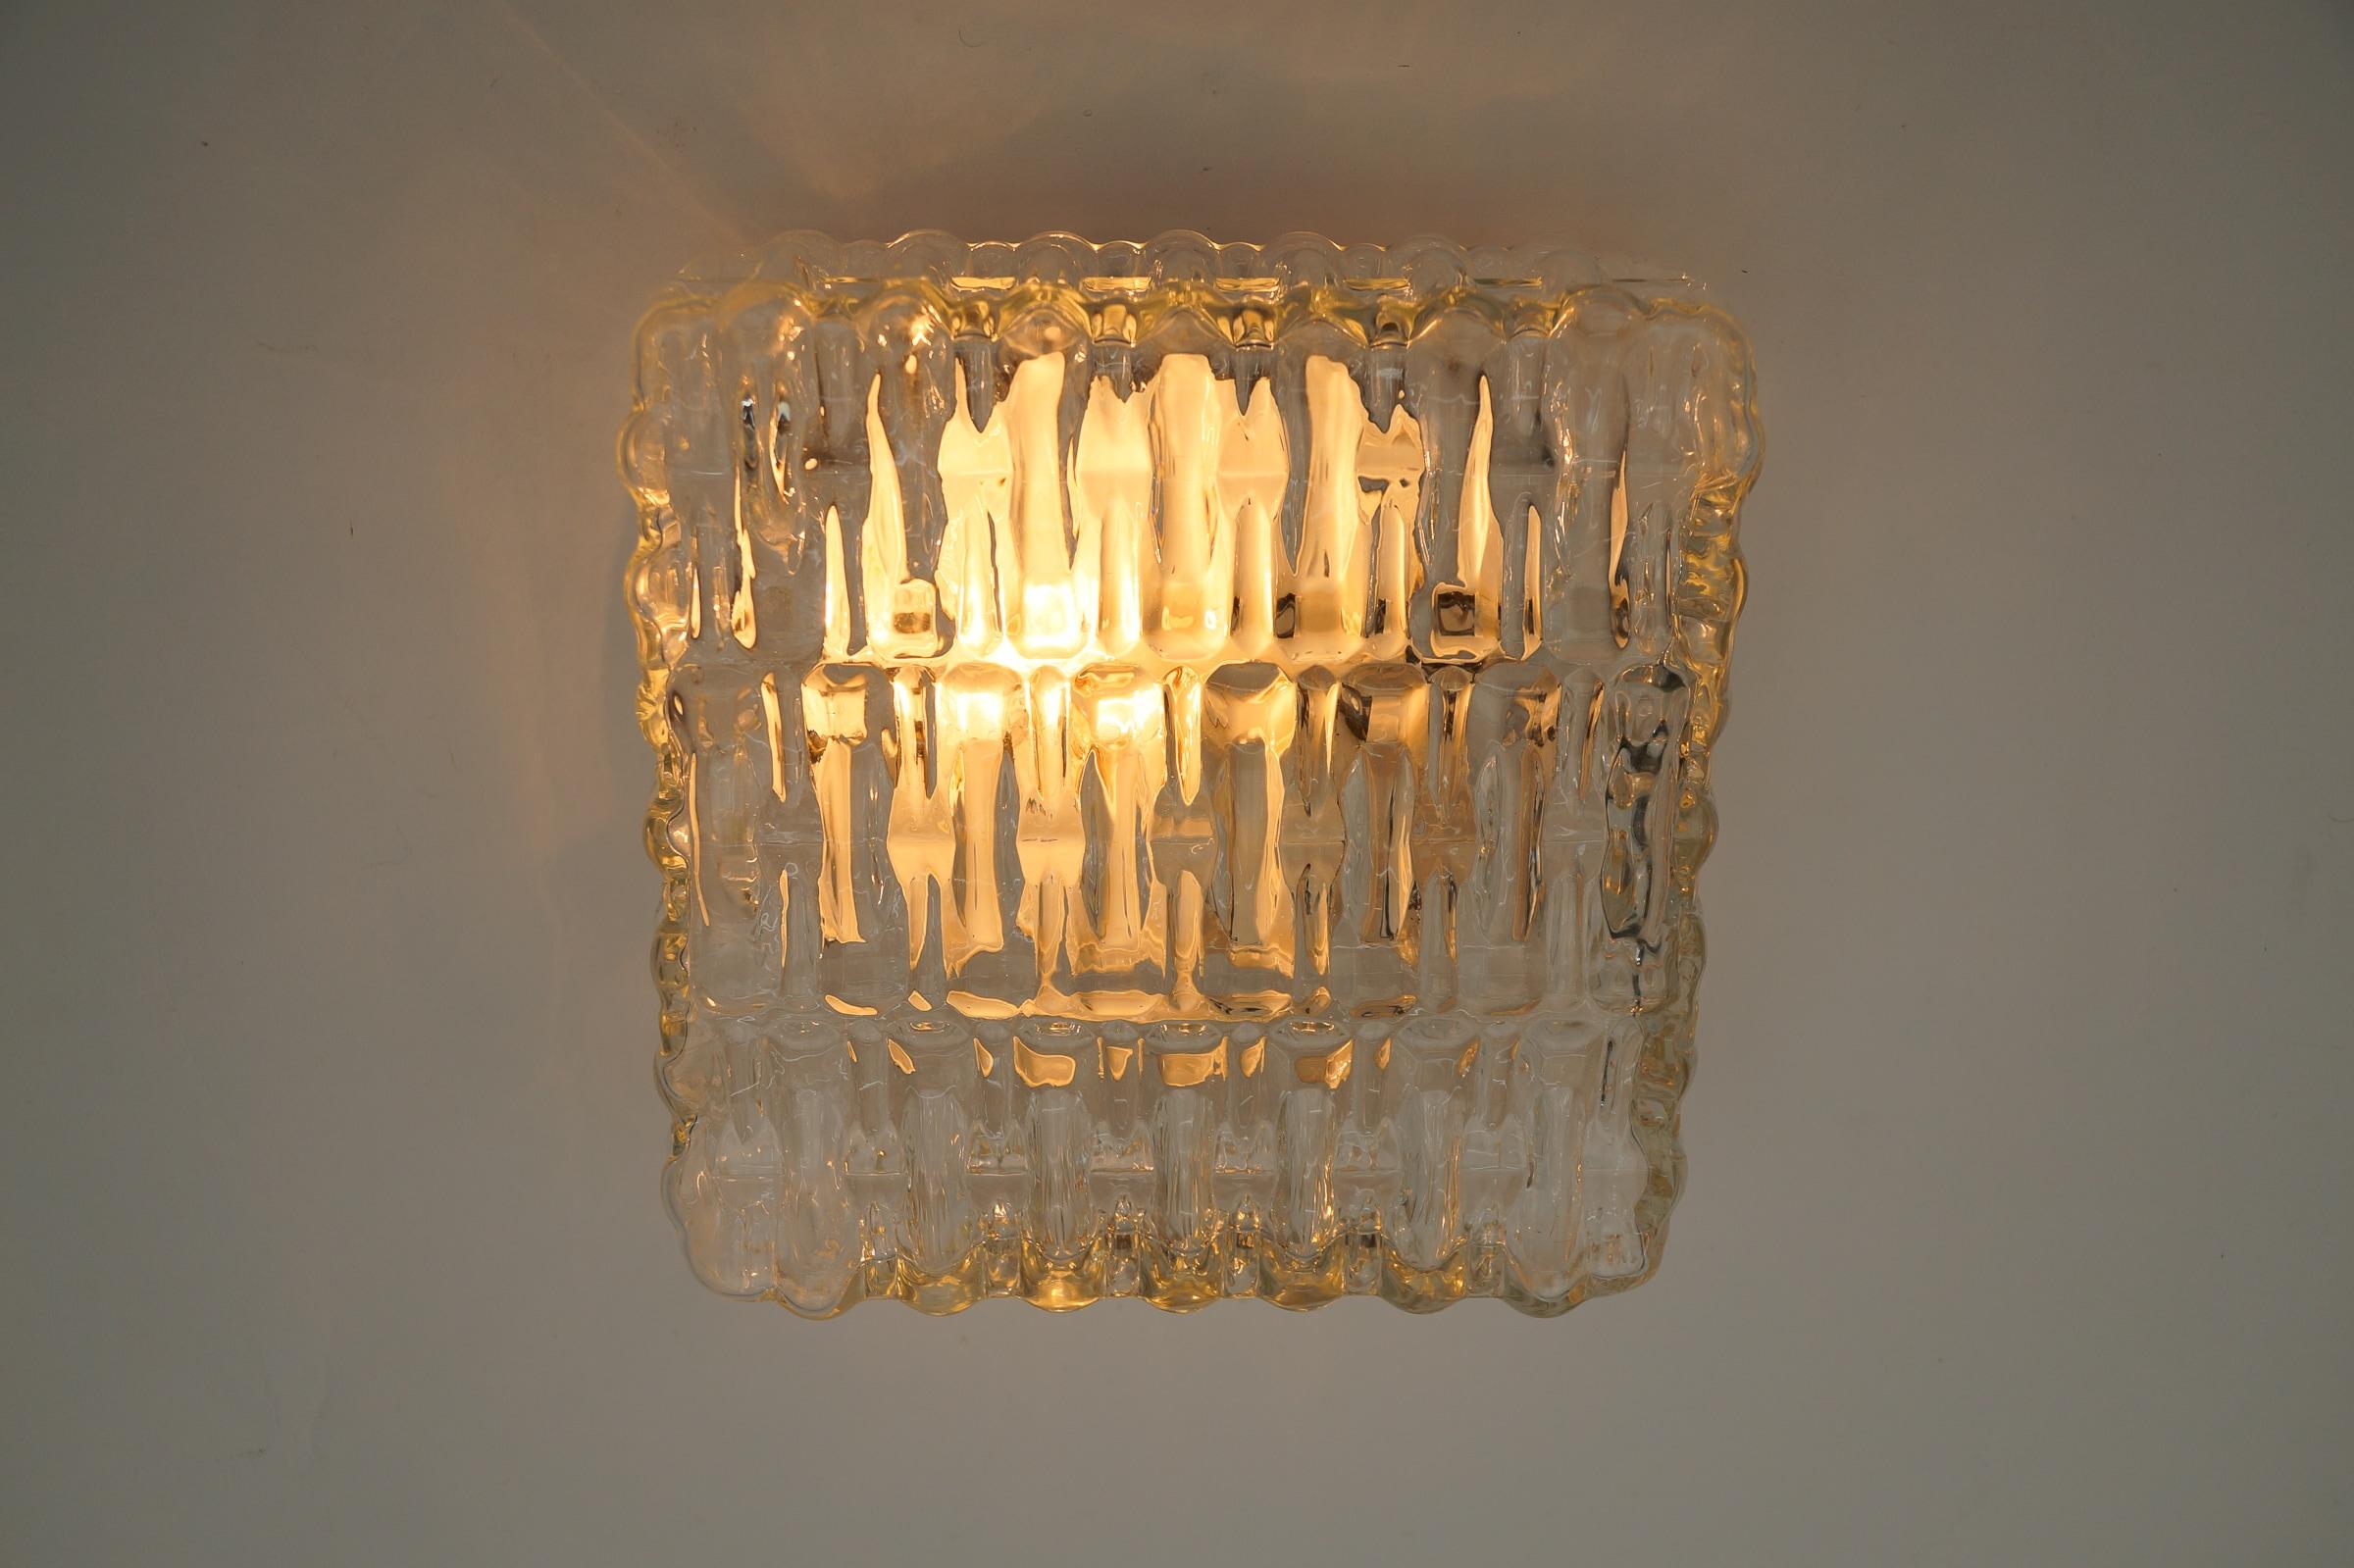 Square Sctructered Heavy Glass Flush Mount Light or Wall Lamp, 1960s For Sale 5